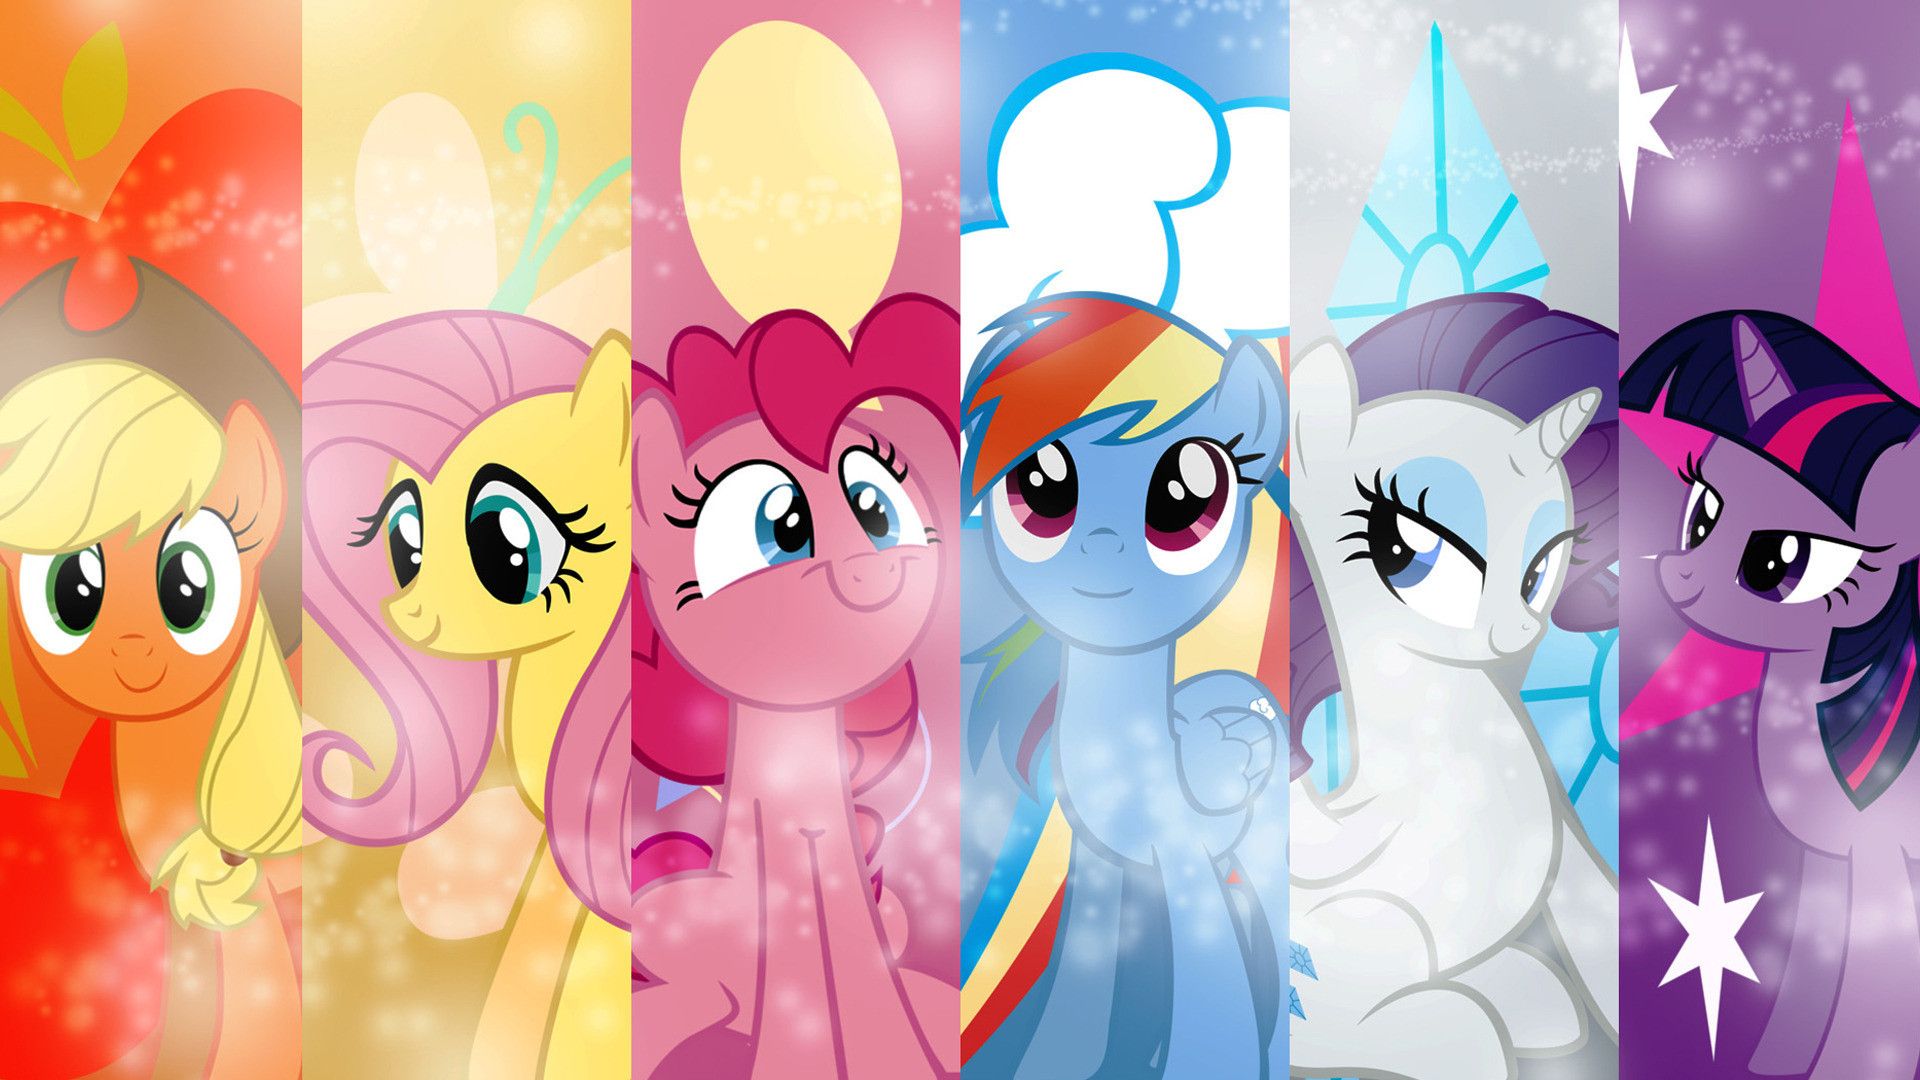 My Little Pony Wallpaper 78 pictures